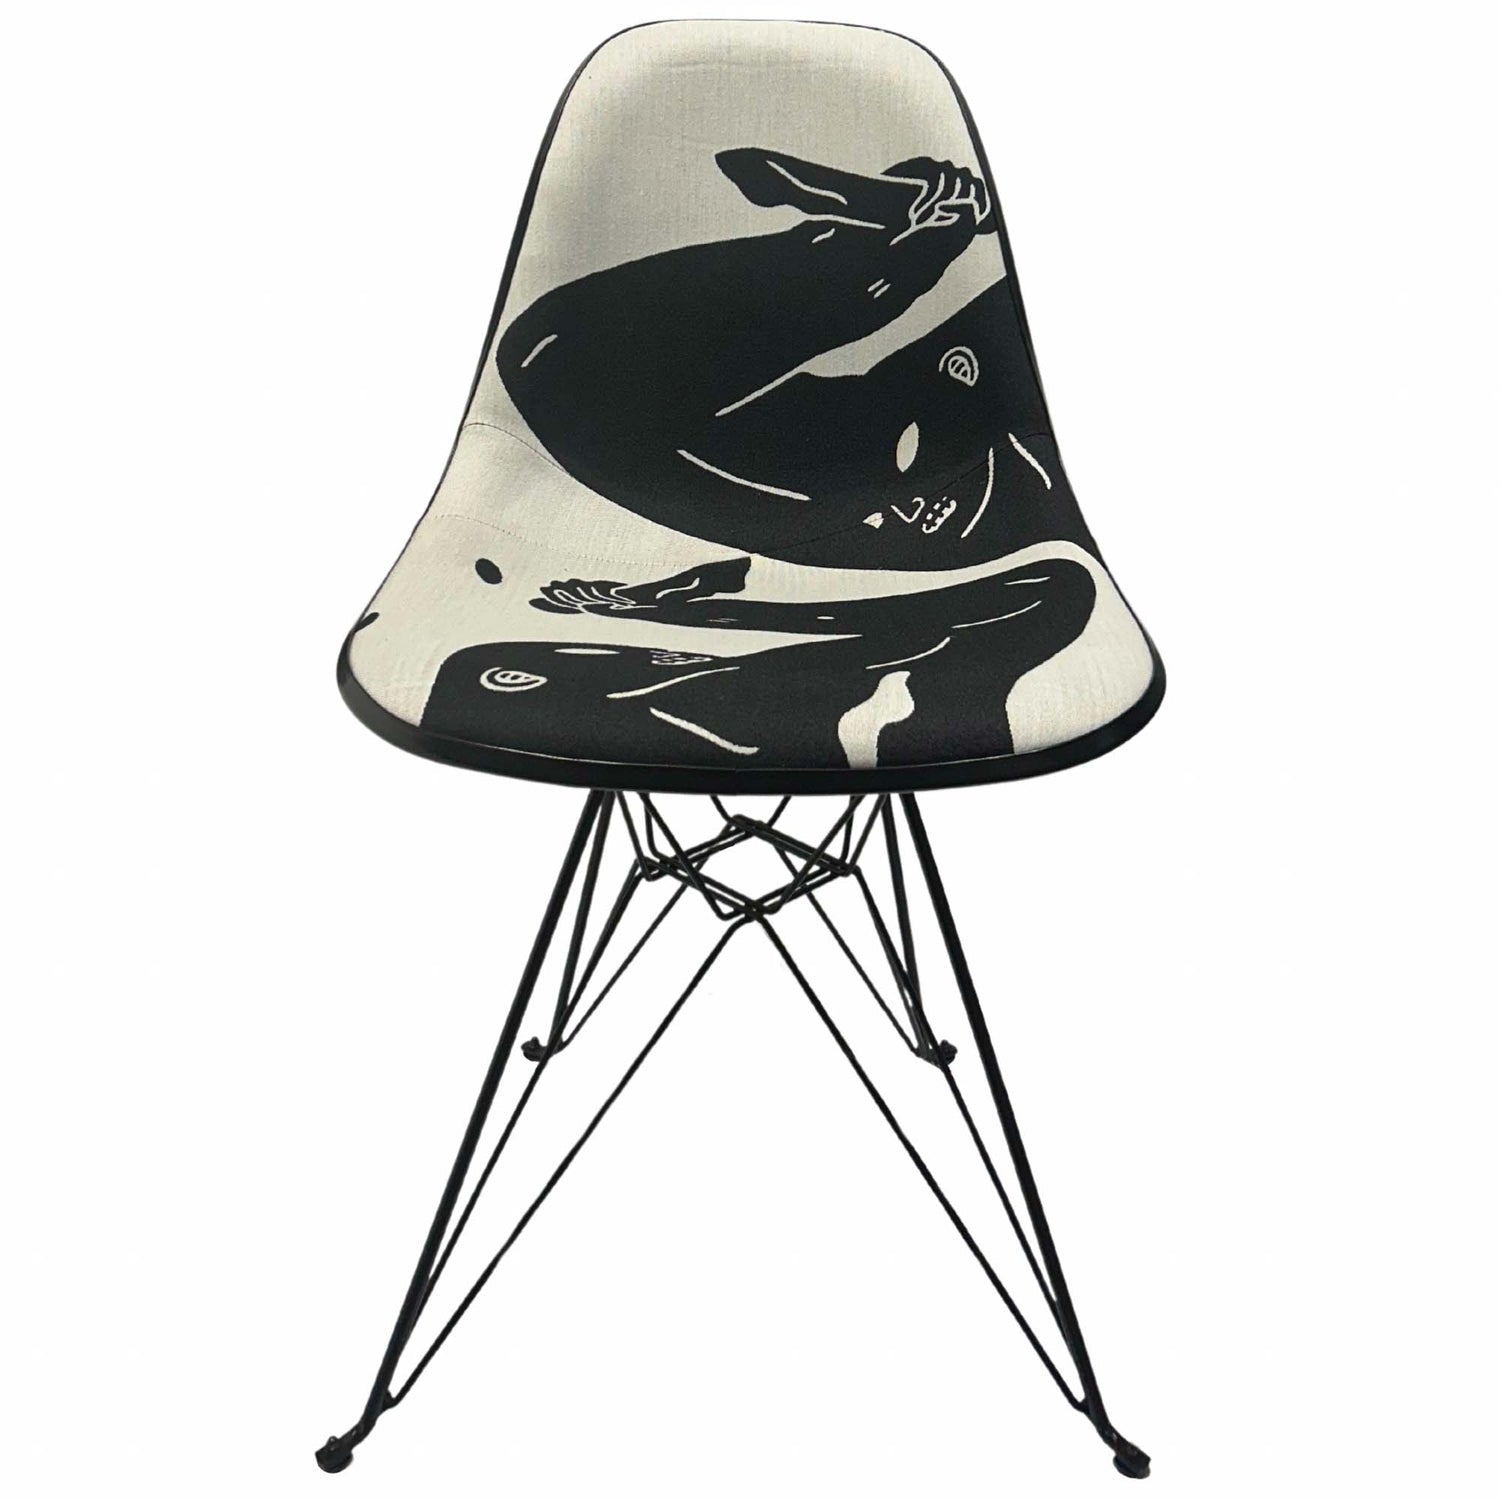 Cleon Peterson Sculpture Chair ZOOM